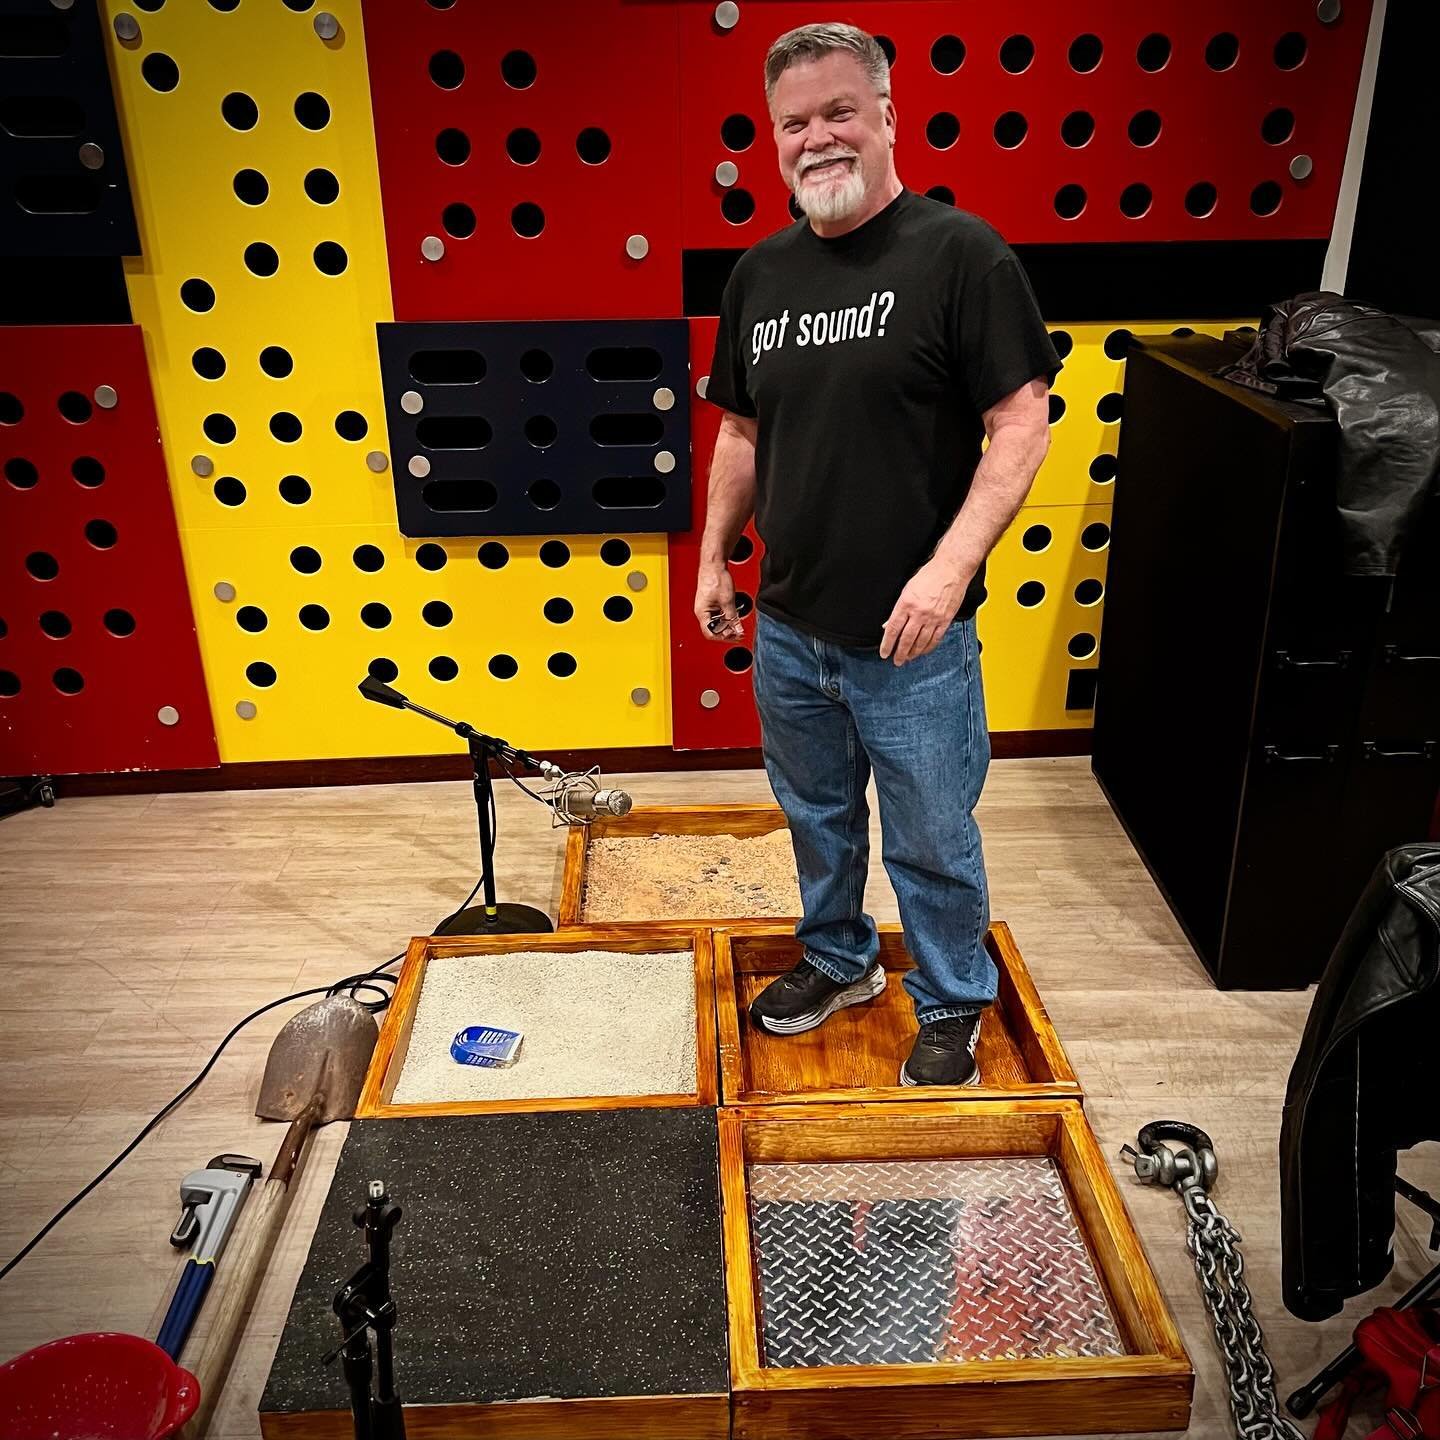 FOLEY FRIDAY!  Looks like I was working double duty on a recent Foley session. Got caught on both sides of the glass.  Foley Artist meet Foley mixer. 😂 (swipe). &bull;
&bull;
&bull;
&bull;
#foleyfriday #postproduction #postaudio #audiopostproduction